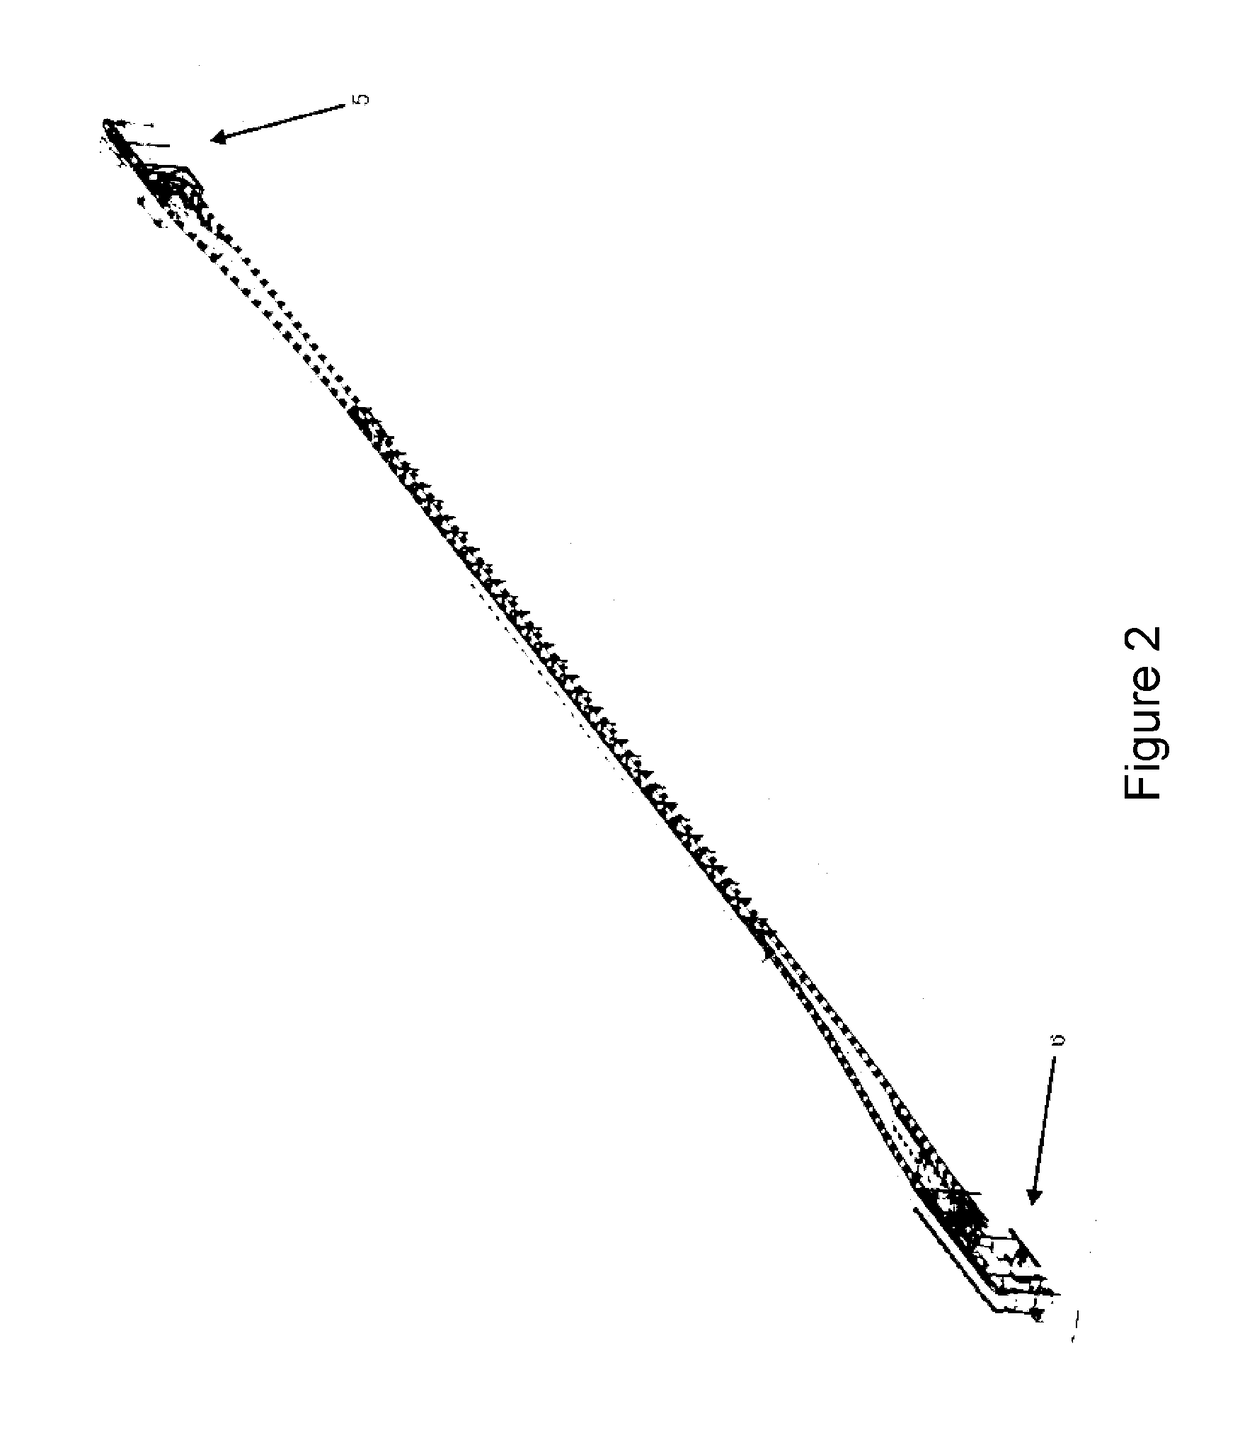 Rail Conveyor System with Vertical Carriage Return